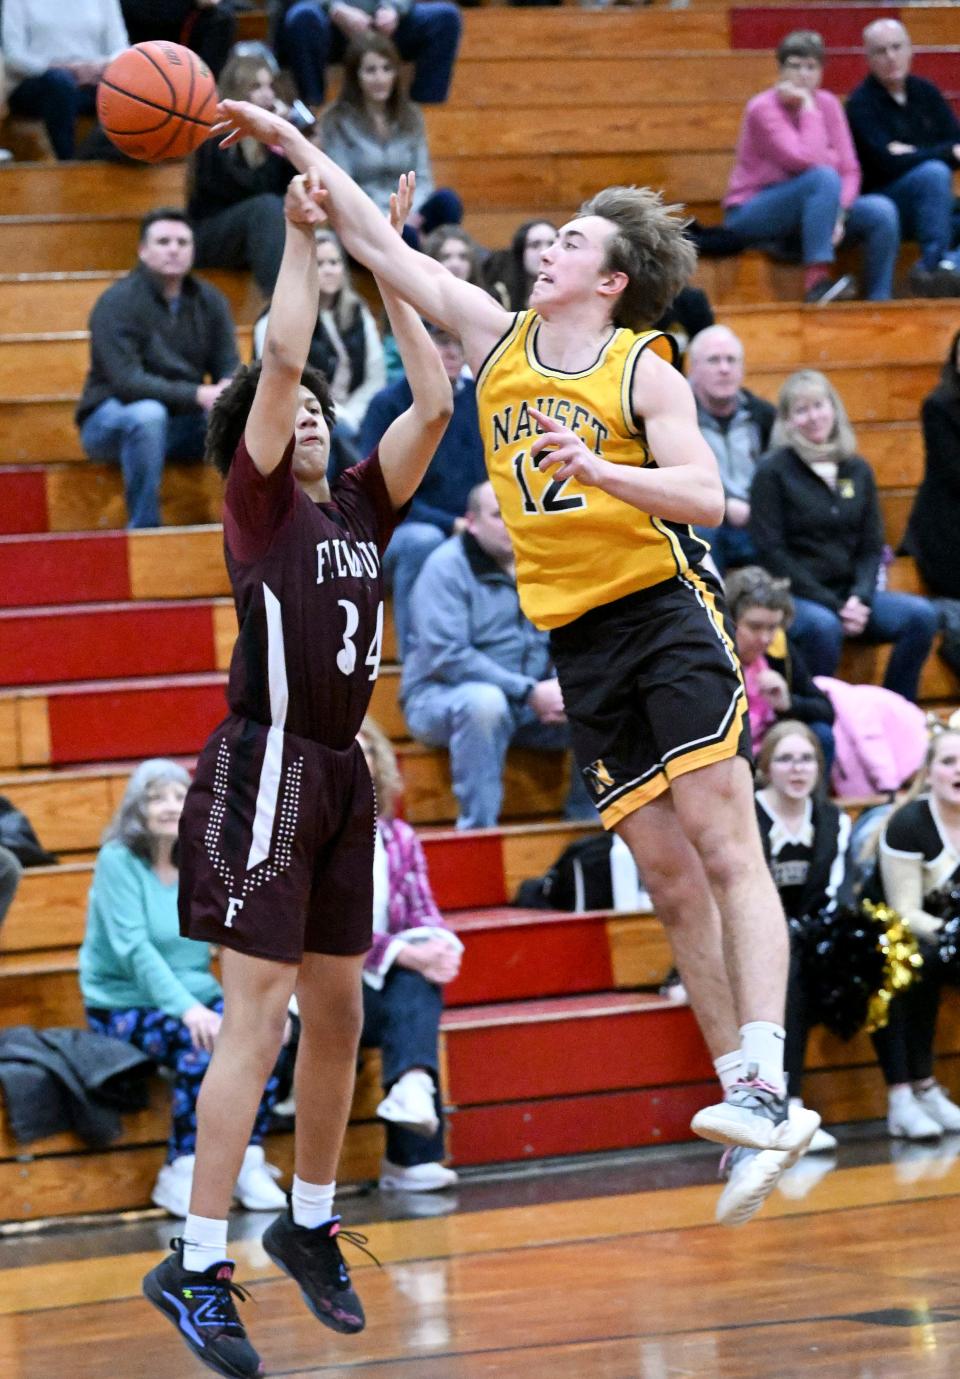 Dillon White of Nauset blocks a shot by Myles Peterkin of Falmouth.
(Photo: Ron Schloerb/Cape Cod Times)